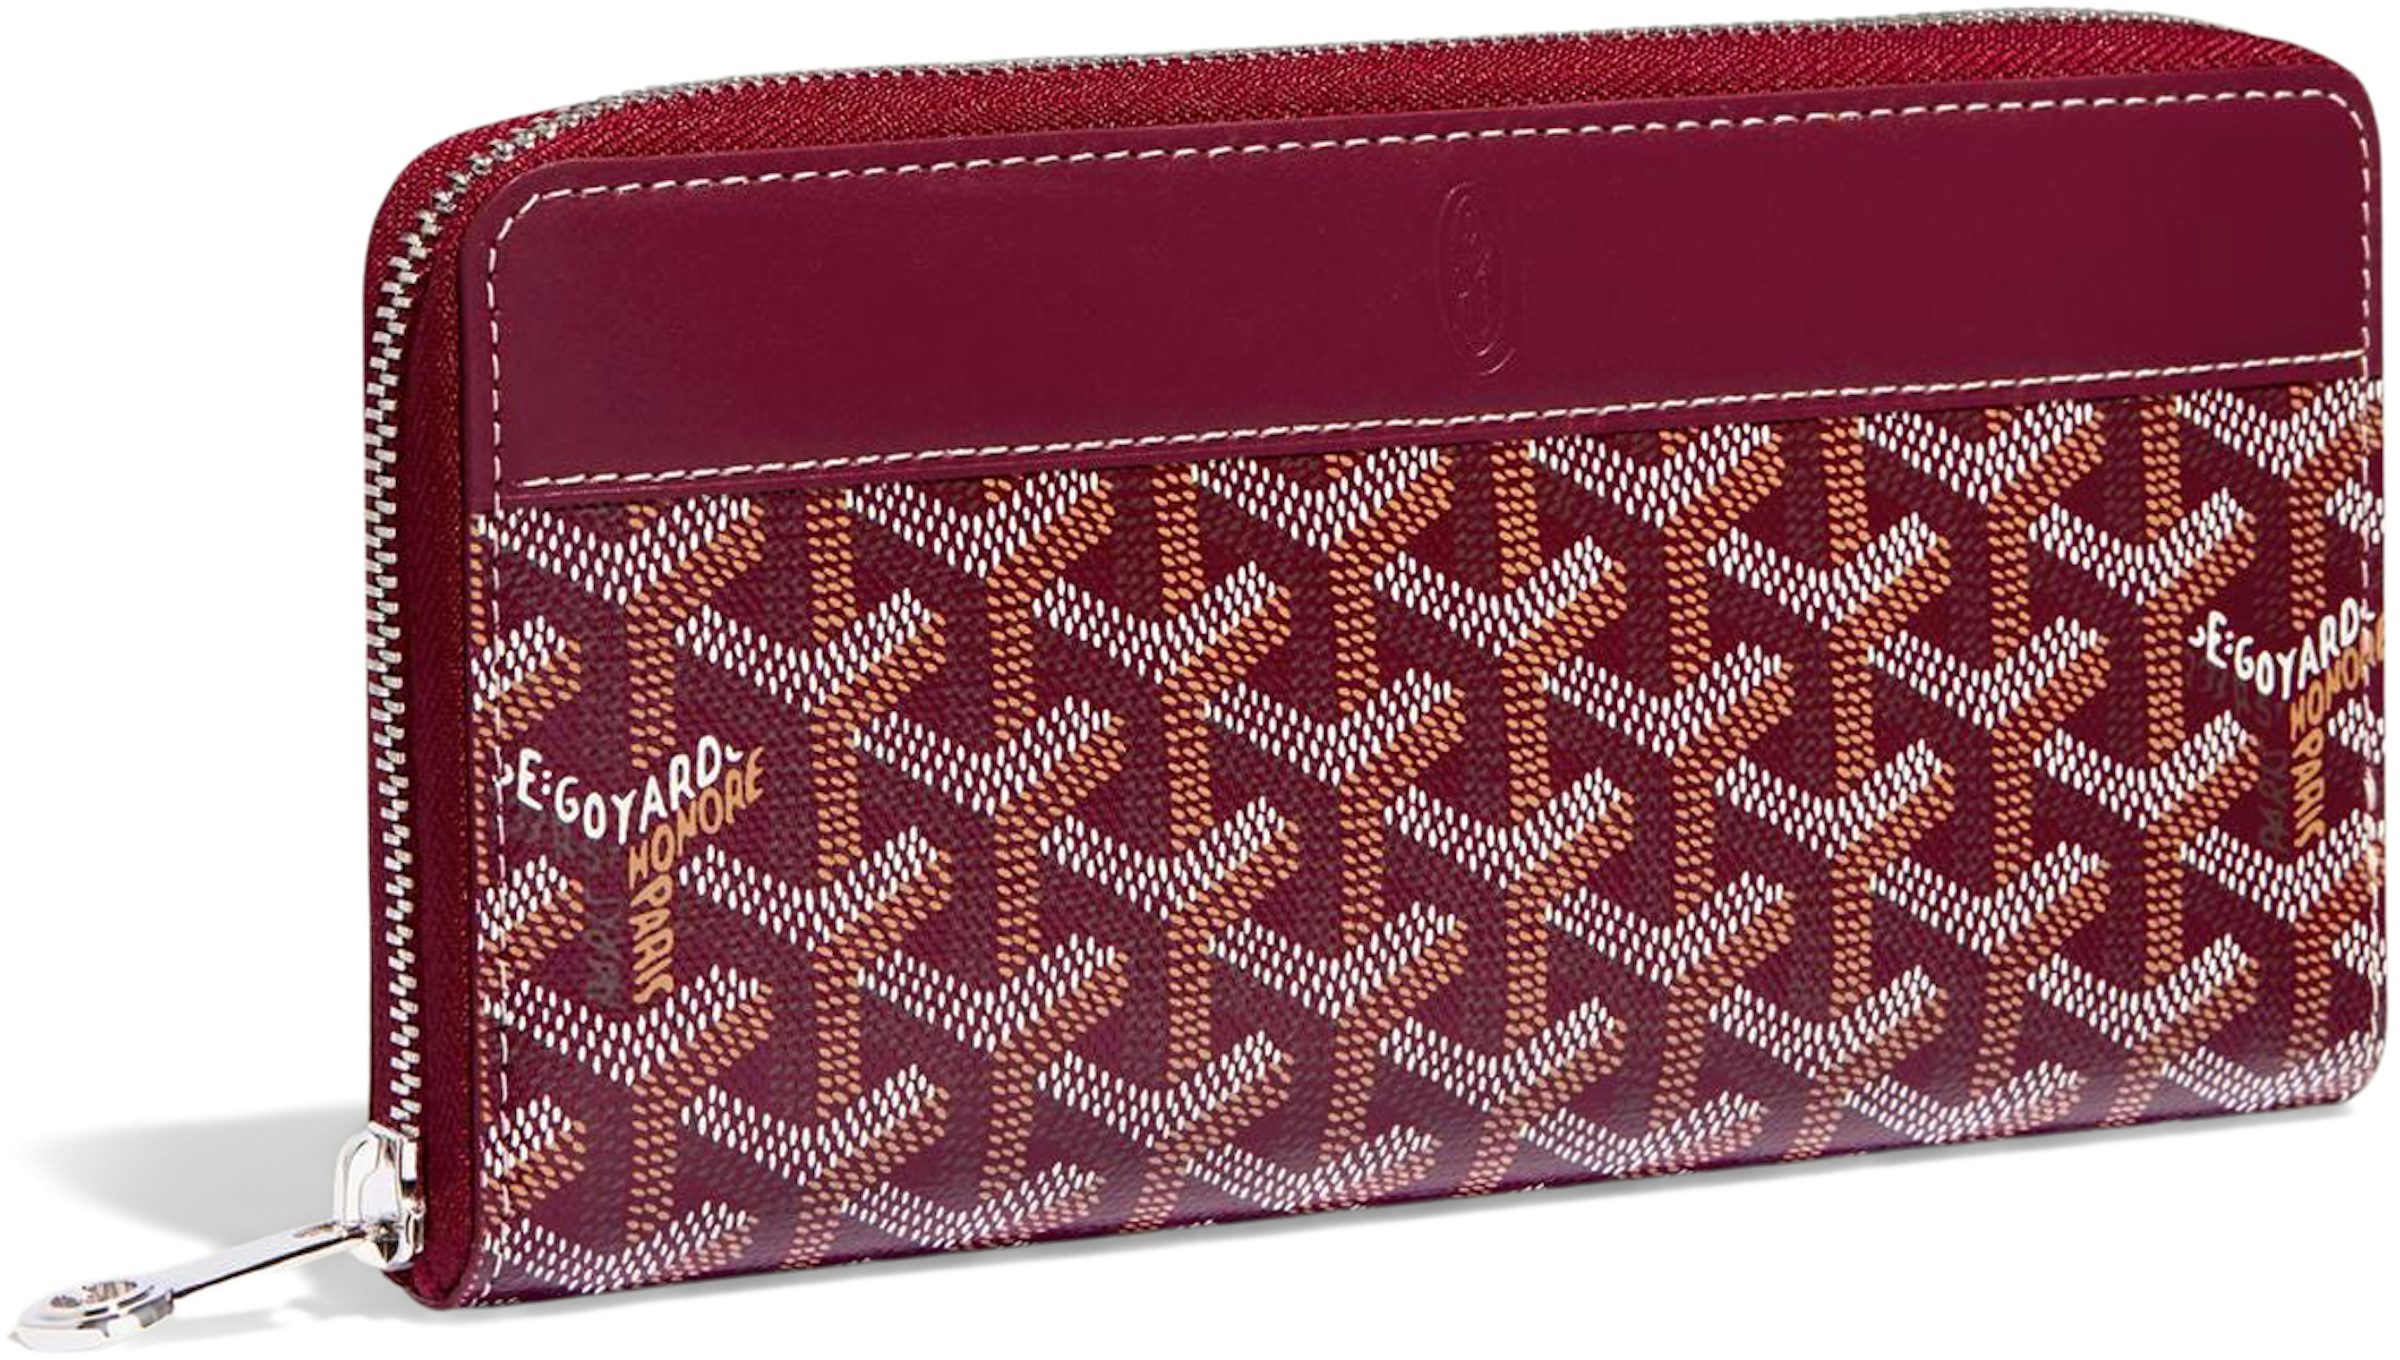 Anyone know where to find this pink goyard card holder? :  r/RepladiesDesigner